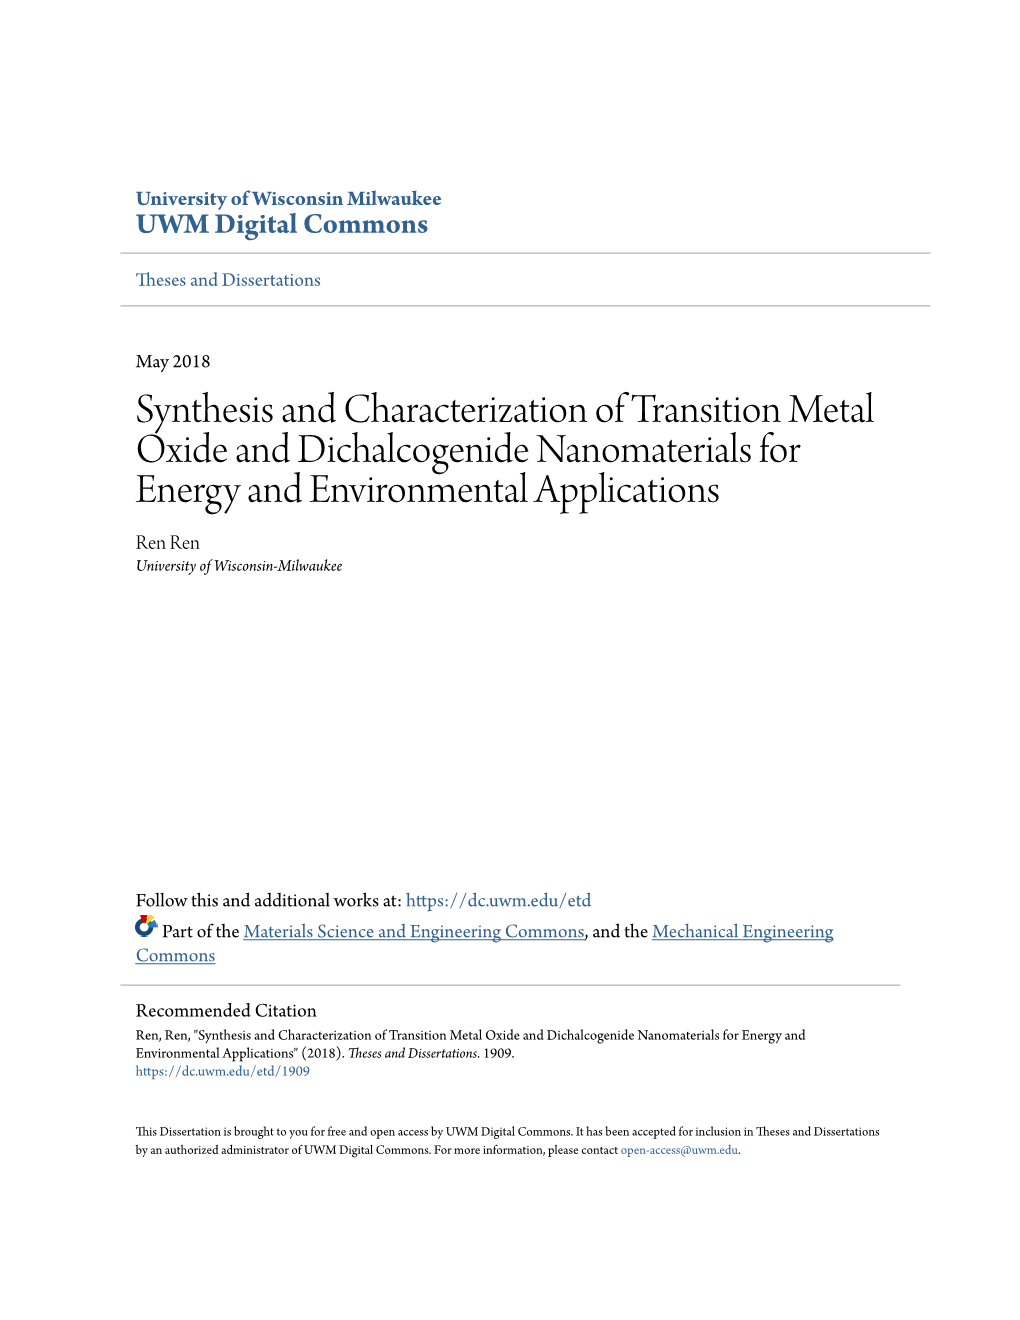 Synthesis and Characterization of Transition Metal Oxide And